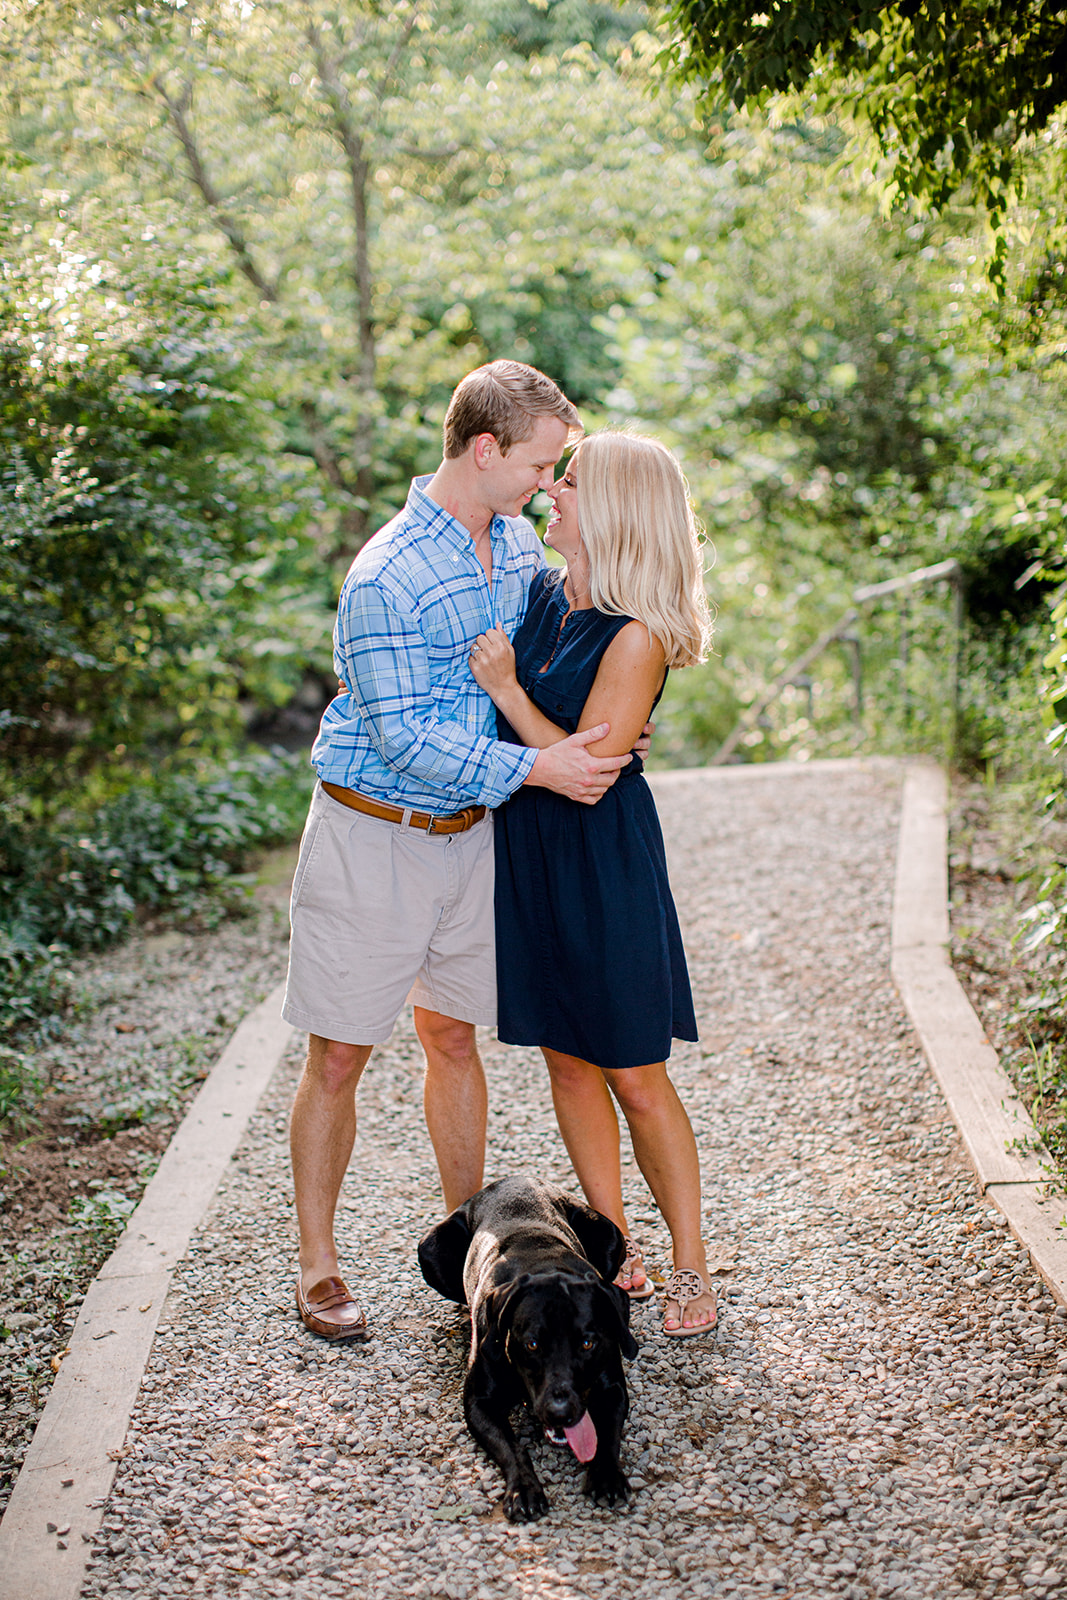 Downtown Franklin Tennessee engagement session by Ashton Brooke Photography featured on Nashville Bride Guide